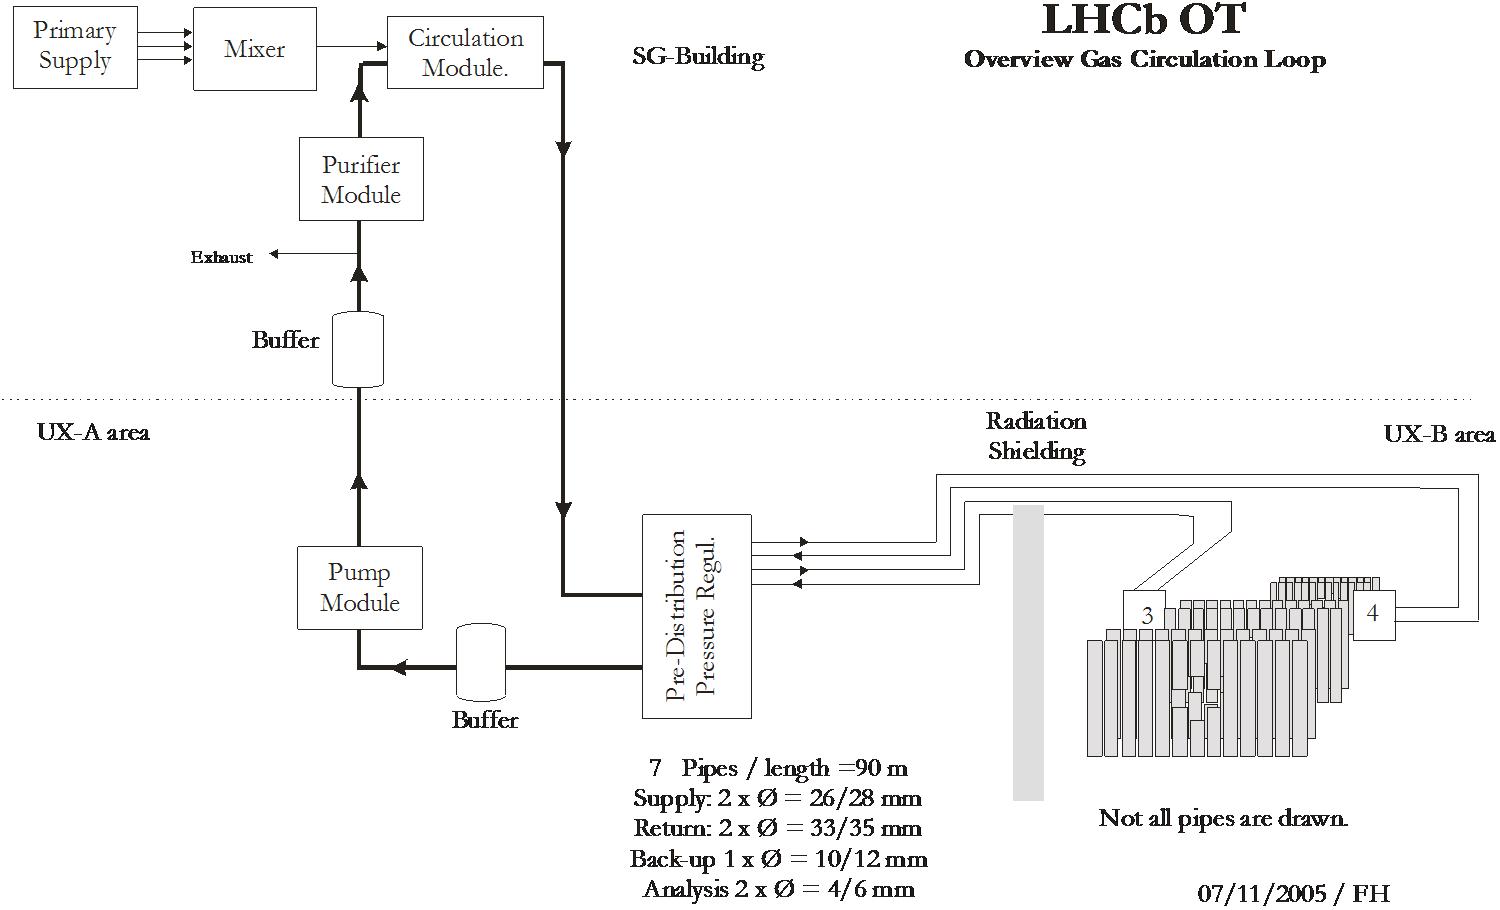 Schematic view of LHCb OT gas system